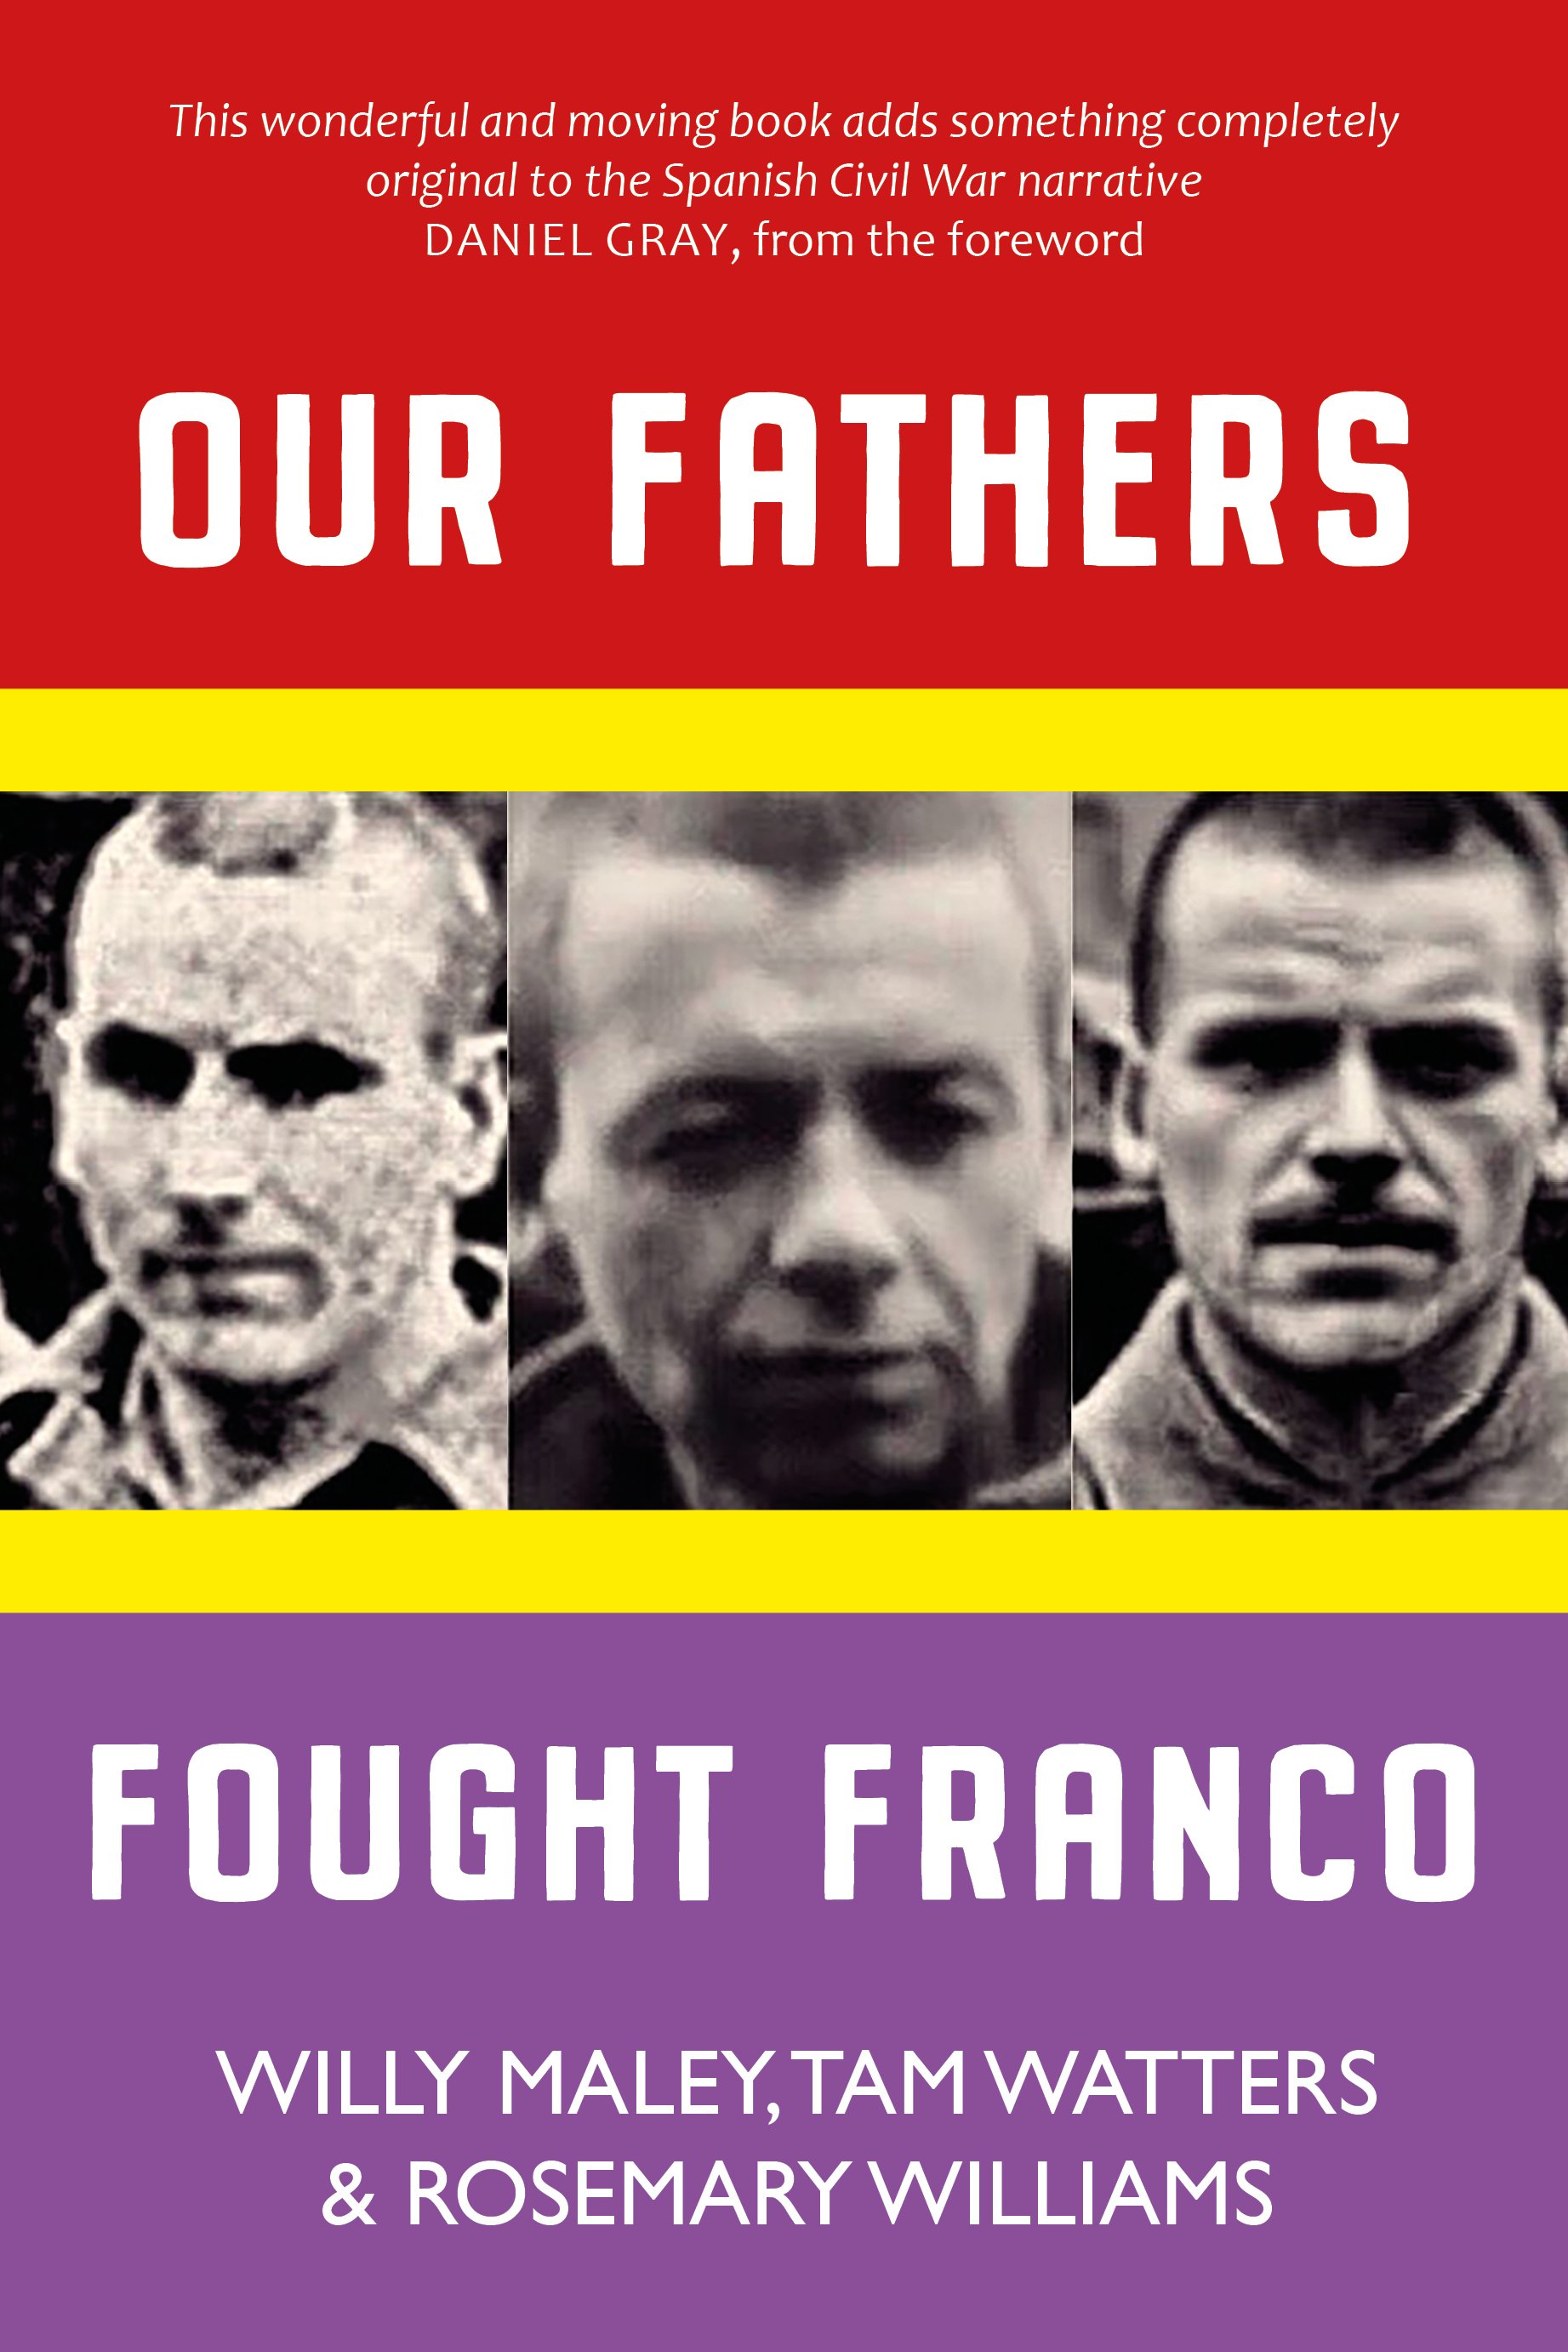 Our Fathers Fought Franco_Working DraftAI.jpg